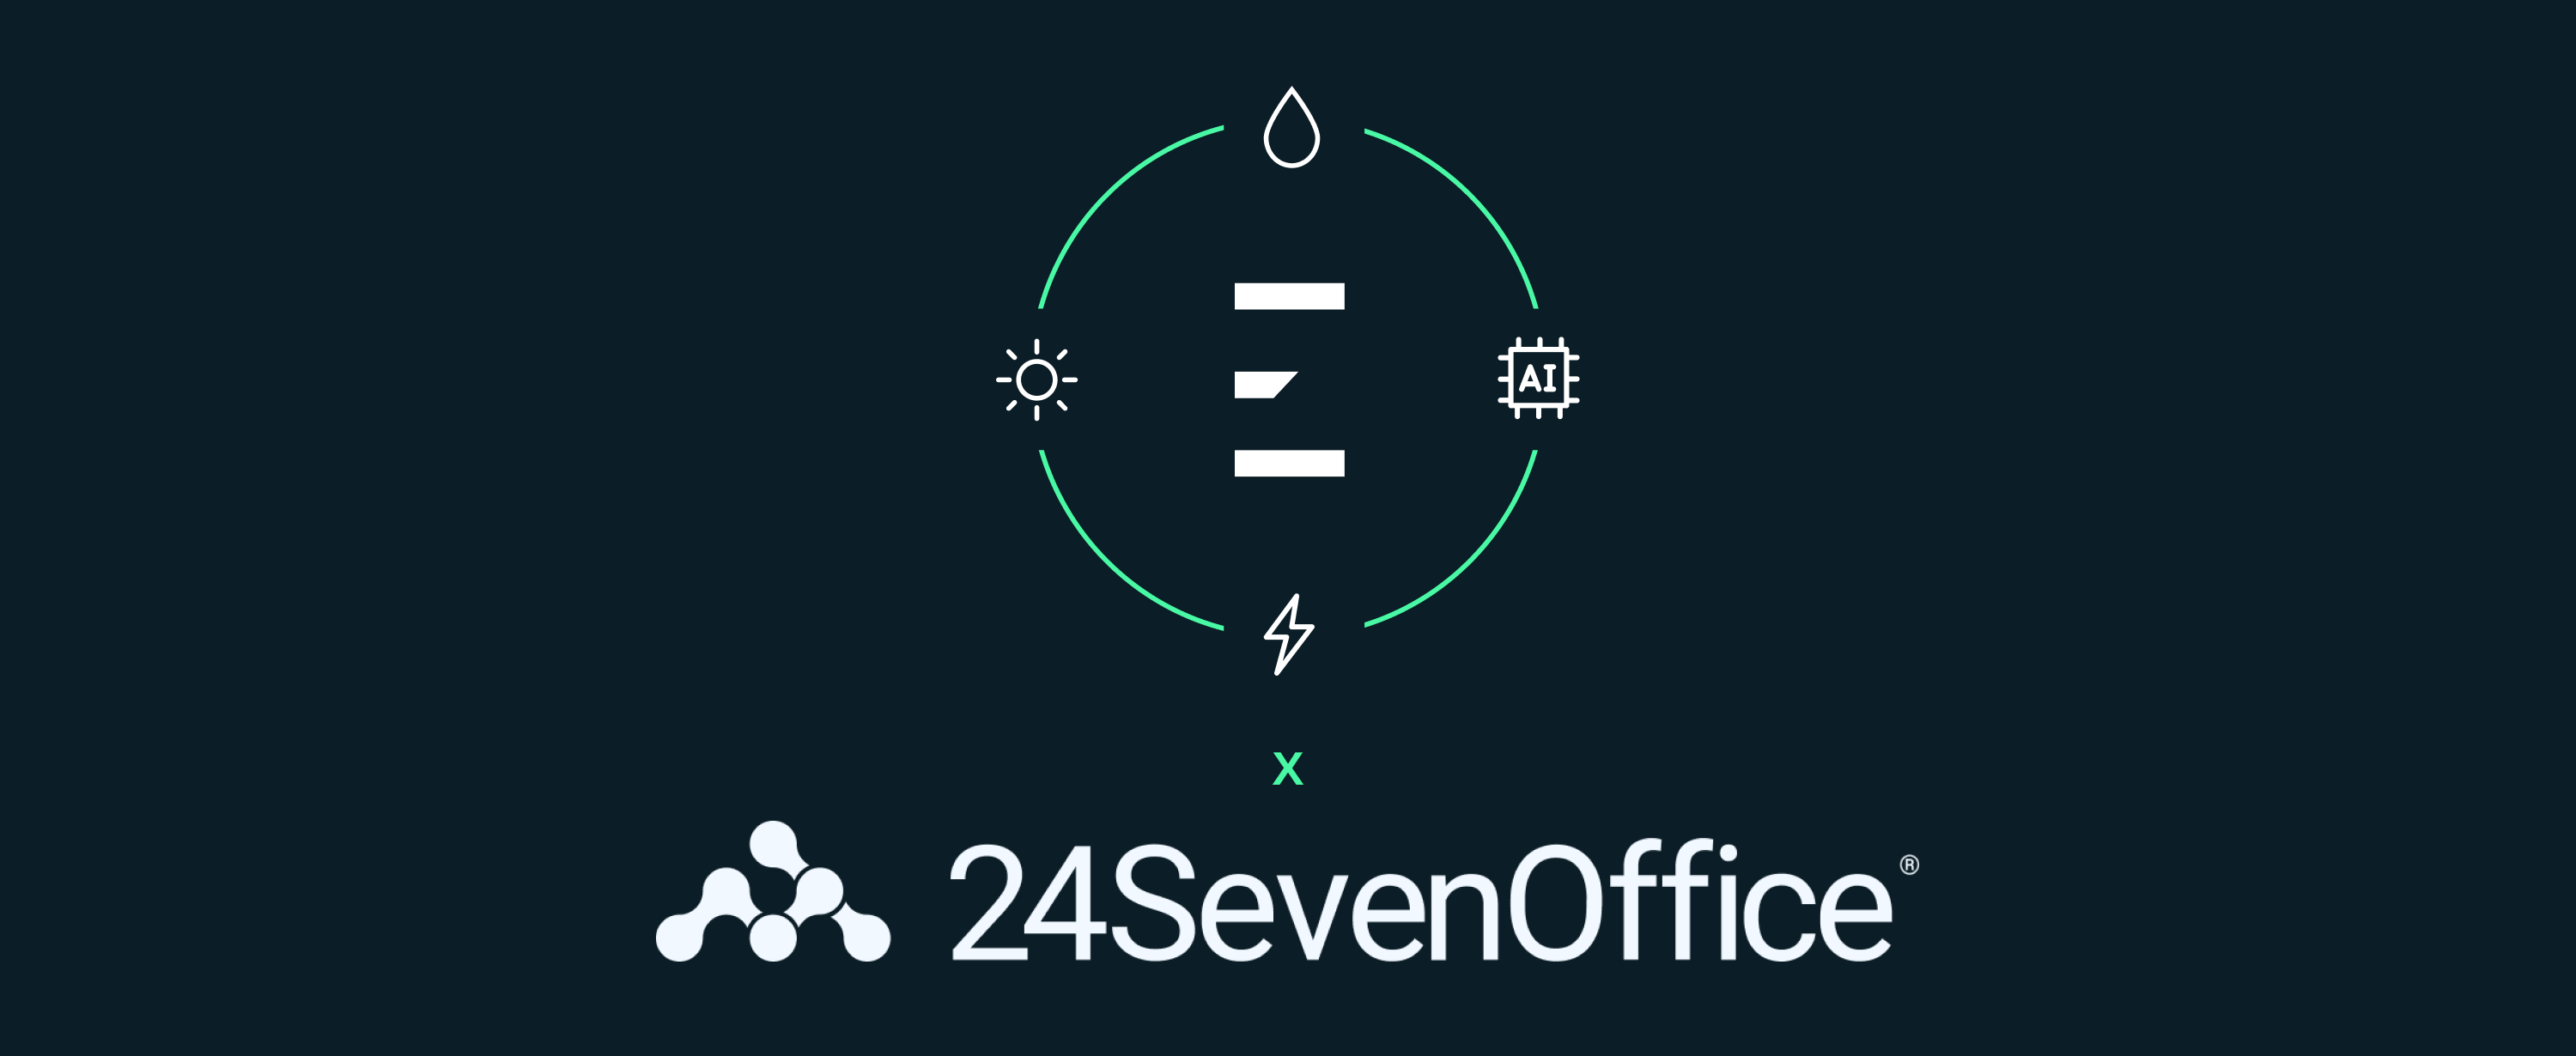 Energi.AI & 24SevenOffice has officially launched an AI driven Net Zero platform for 66.700 companies. 